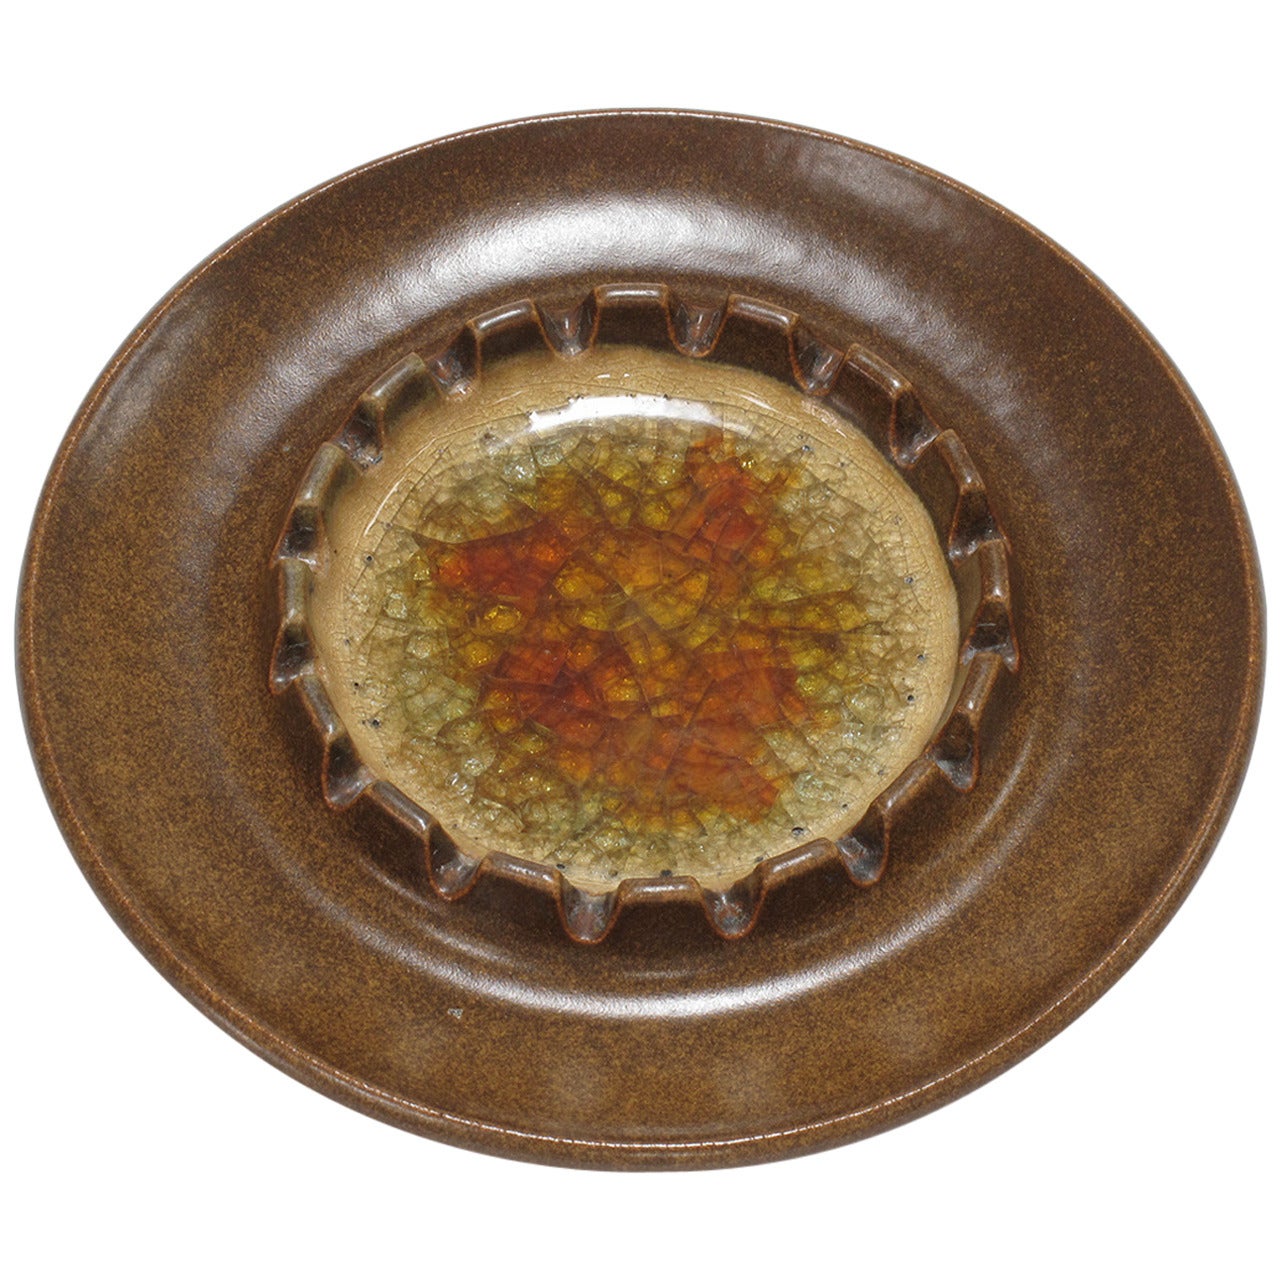 Glazed Stoneware Dish by Robert Maxwell For Sale